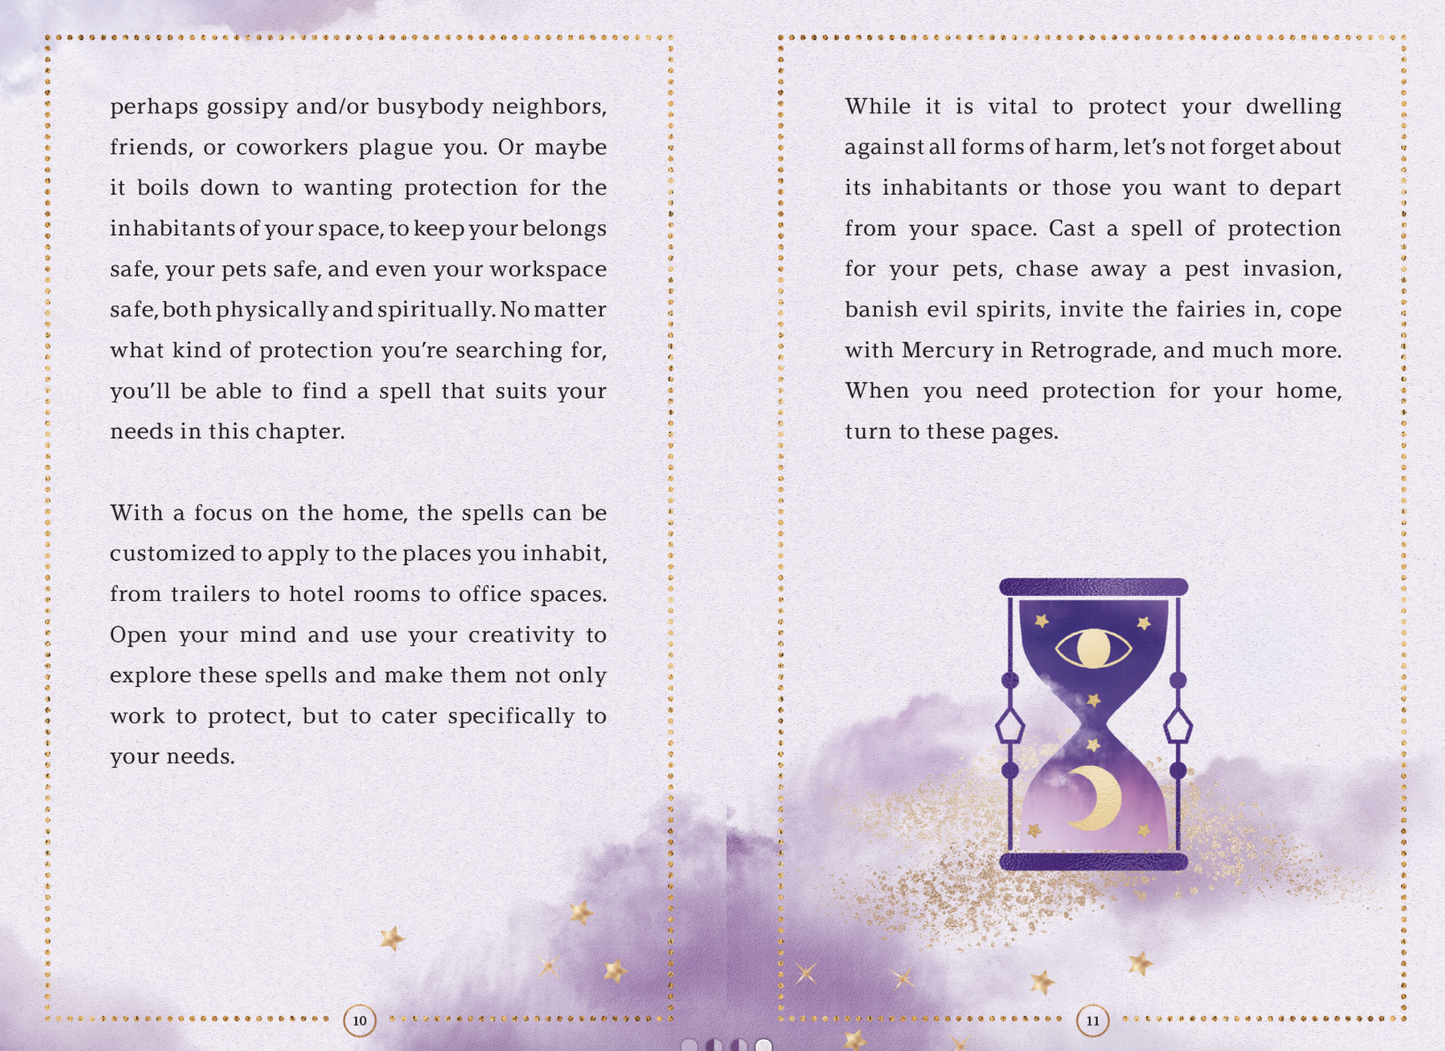 Protection Spells: An Enchanting Spell Book to Clear Negative Energy